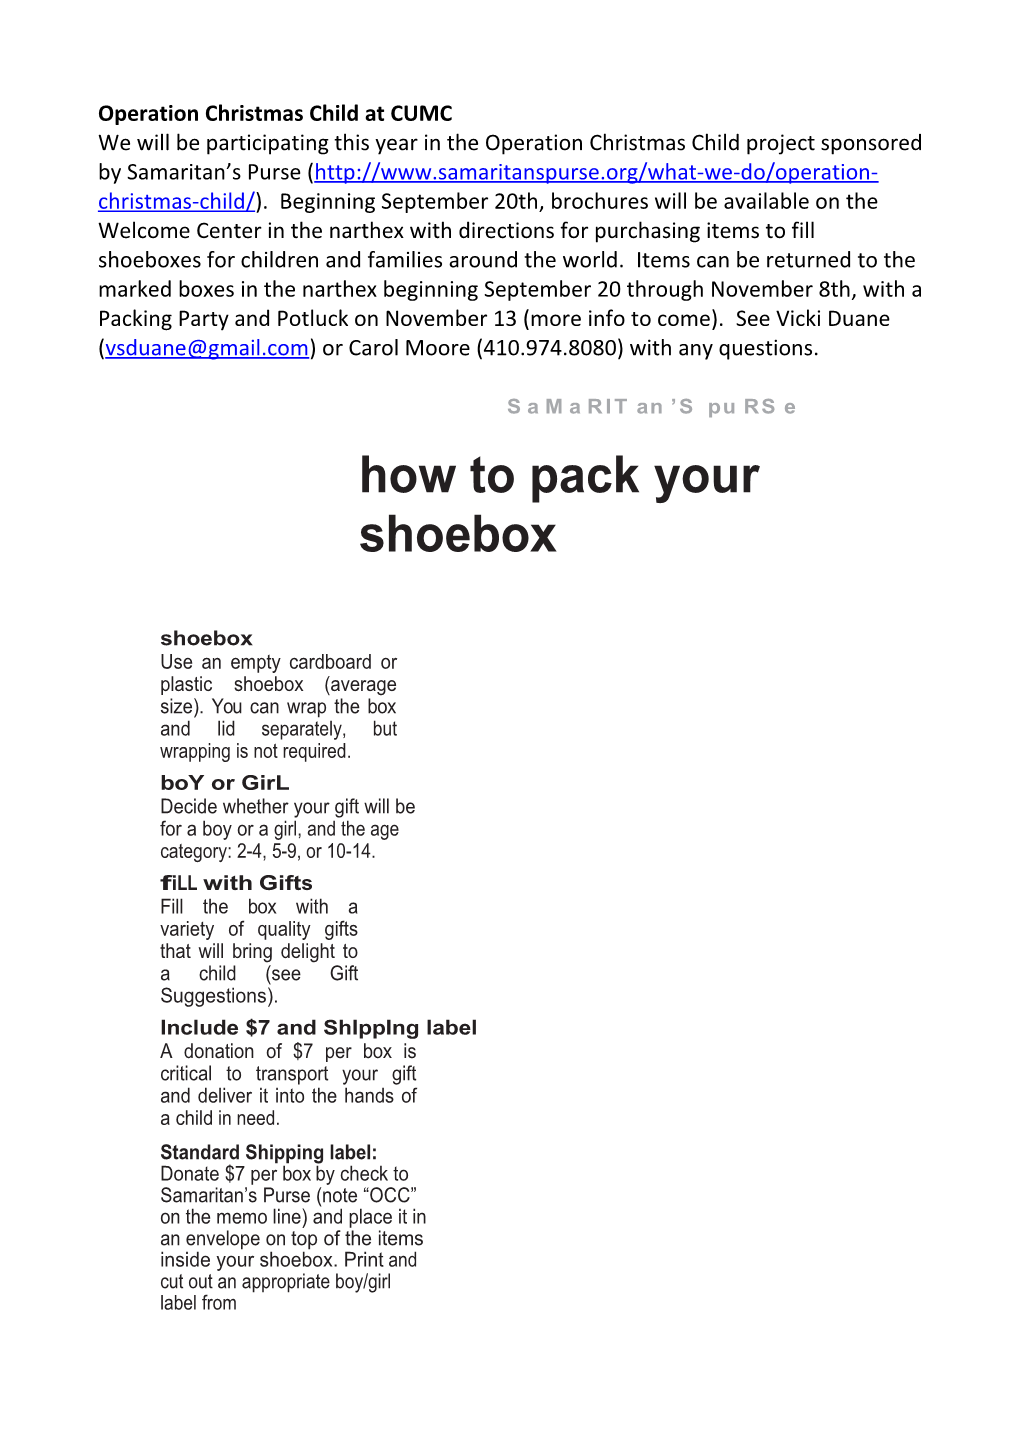 How to Pack Large Print8-29-14.Indd